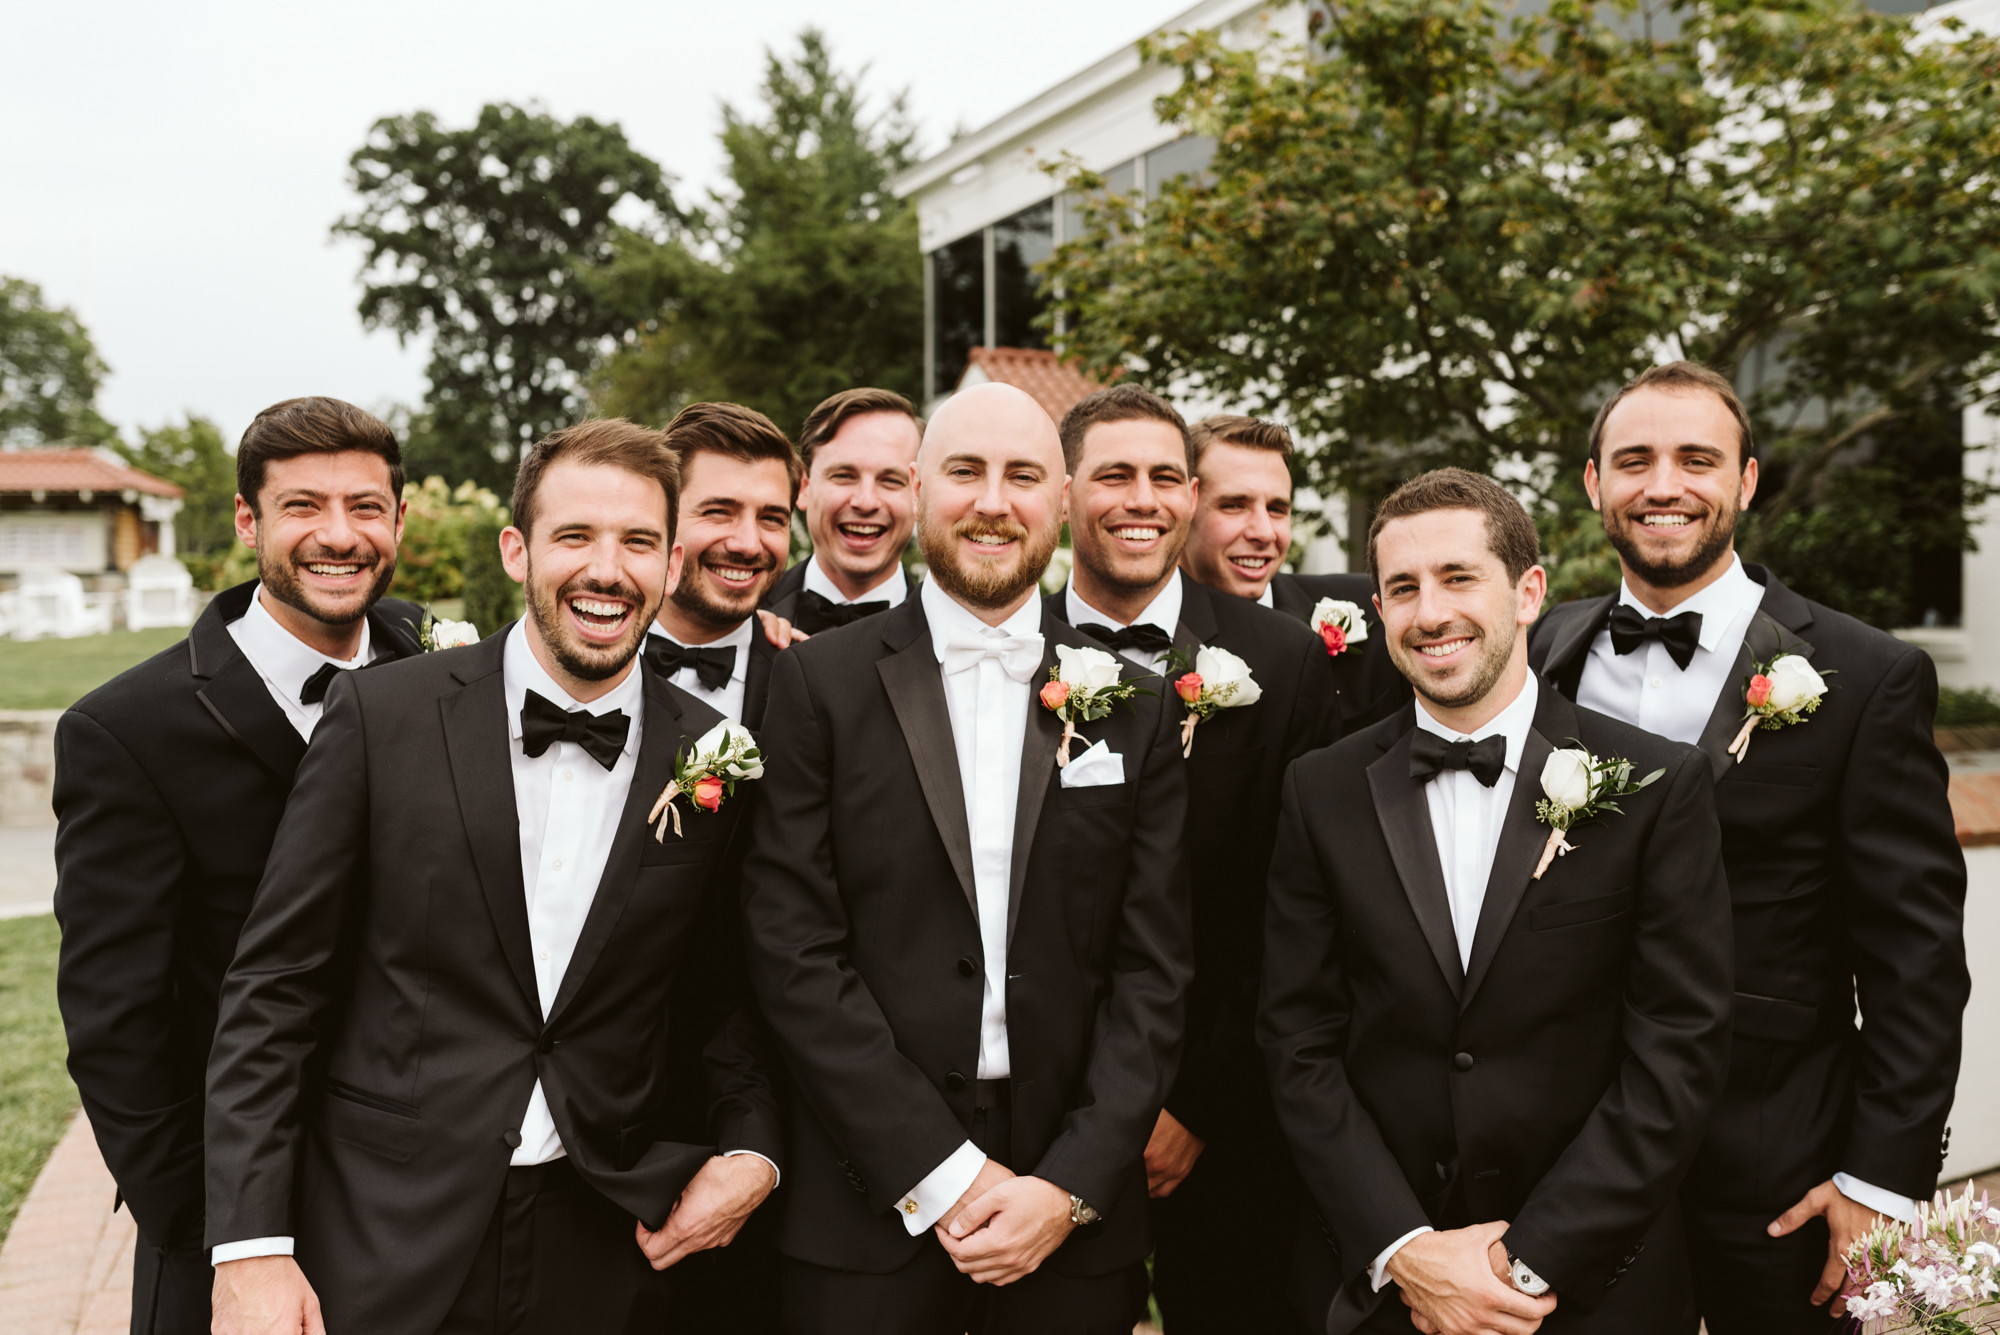 Elegant, Columbia Country Club, Chevy Chase Maryland, Baltimore Wedding Photographer, Classic, Traditional, Groom with Groomsmen, relaxed Portrait, Hugo Boss Suit